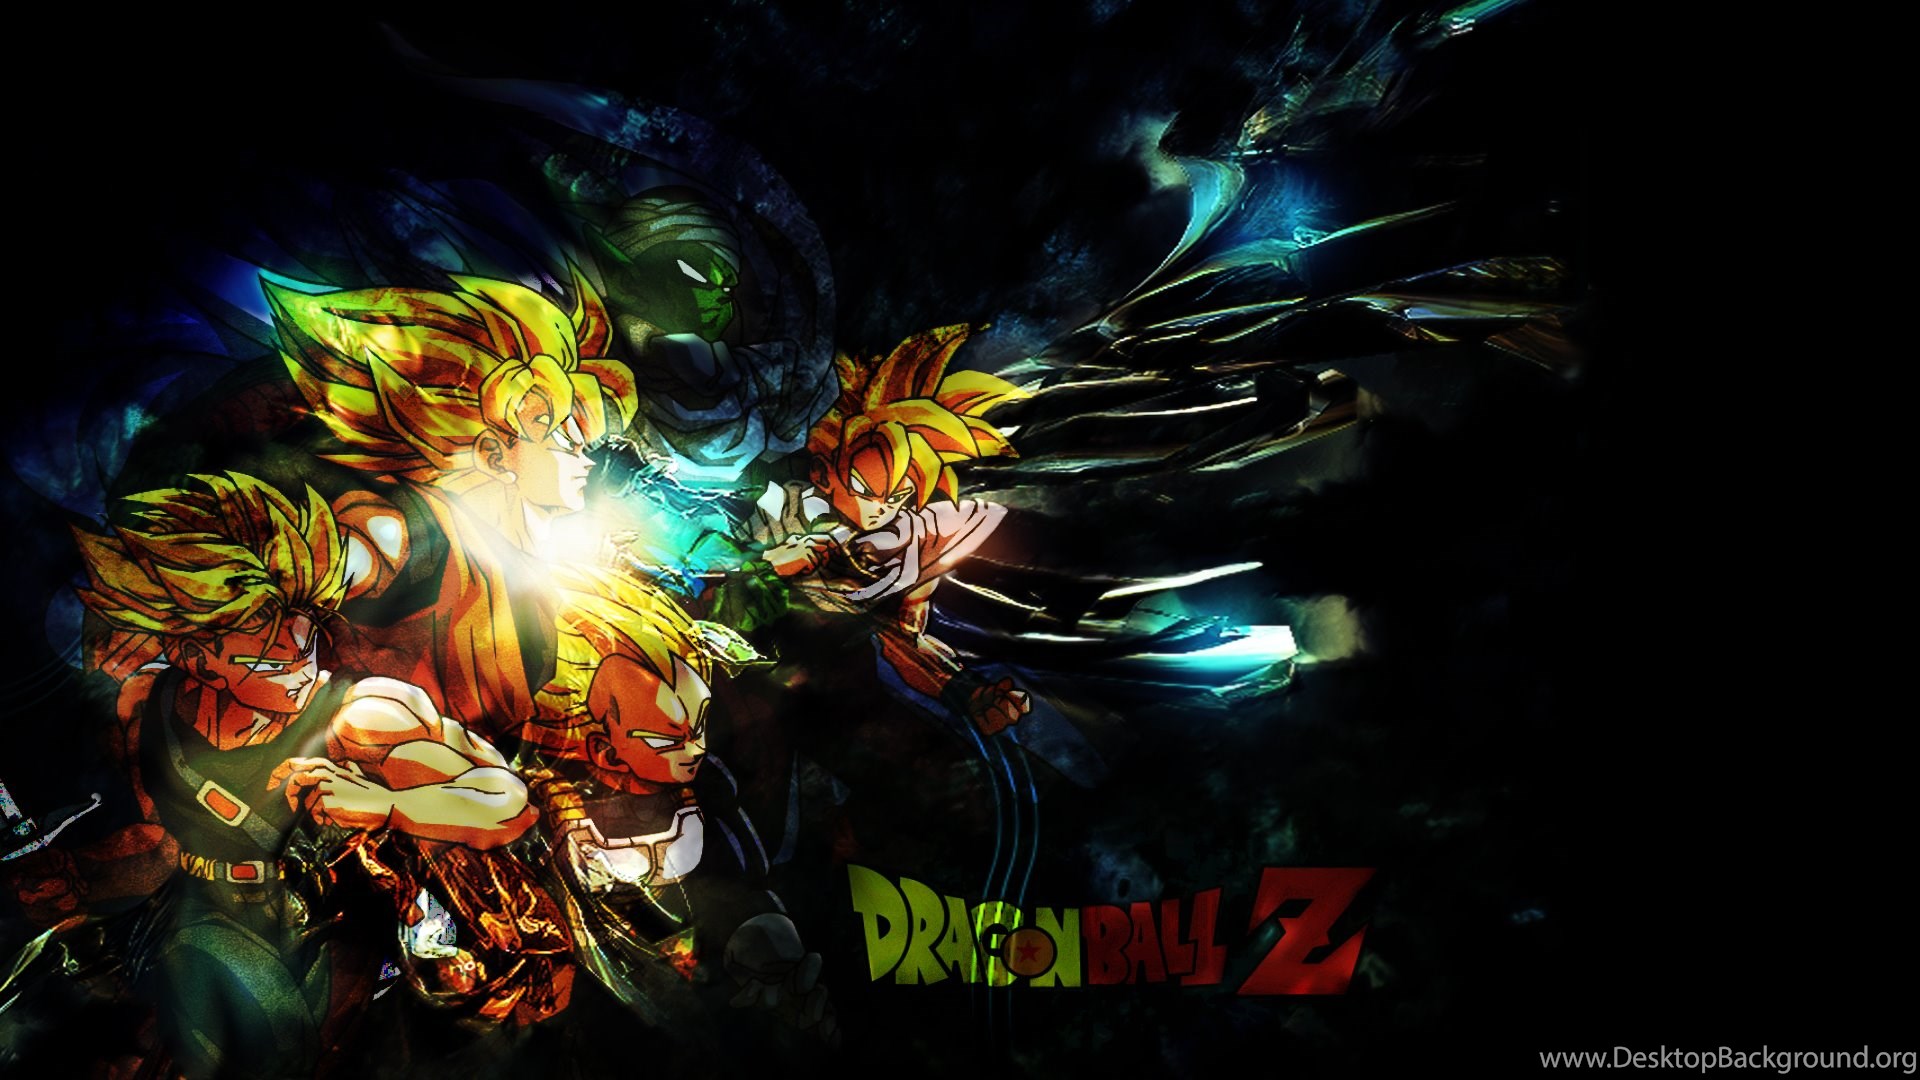 wallpapers hd dragon ball z,graphic design,pc game,fictional character,darkness,cg artwork